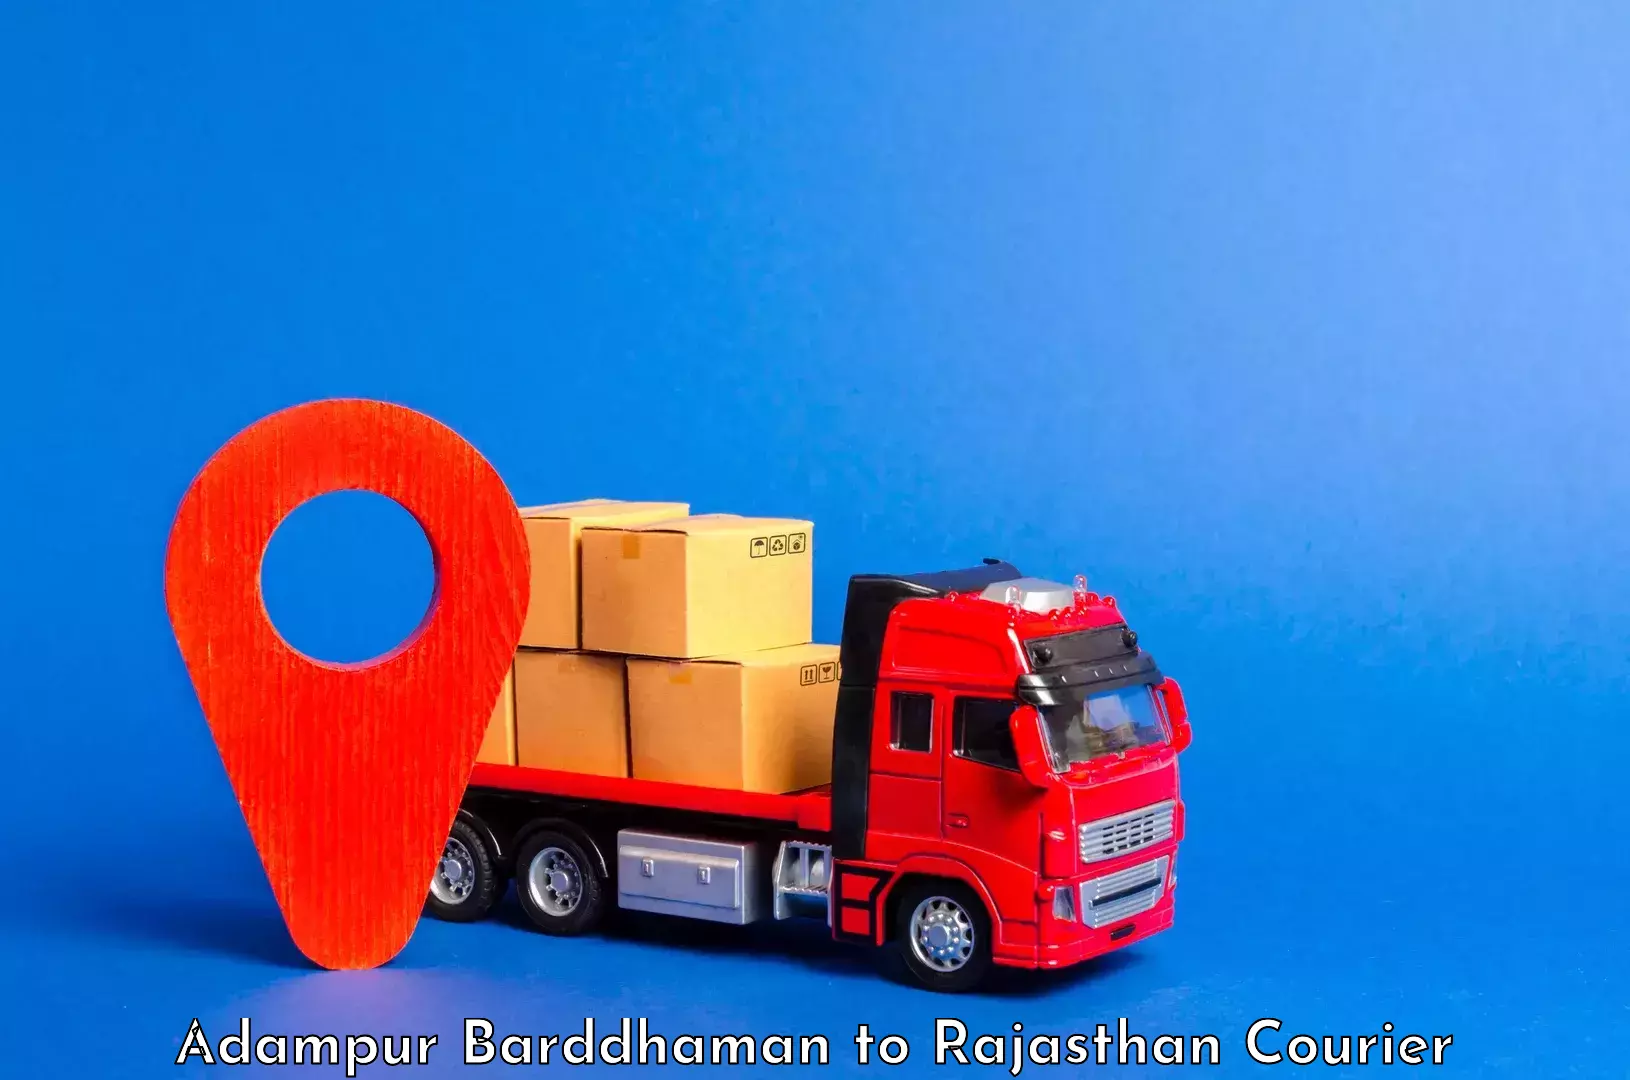 Luggage delivery network Adampur Barddhaman to Piparcity